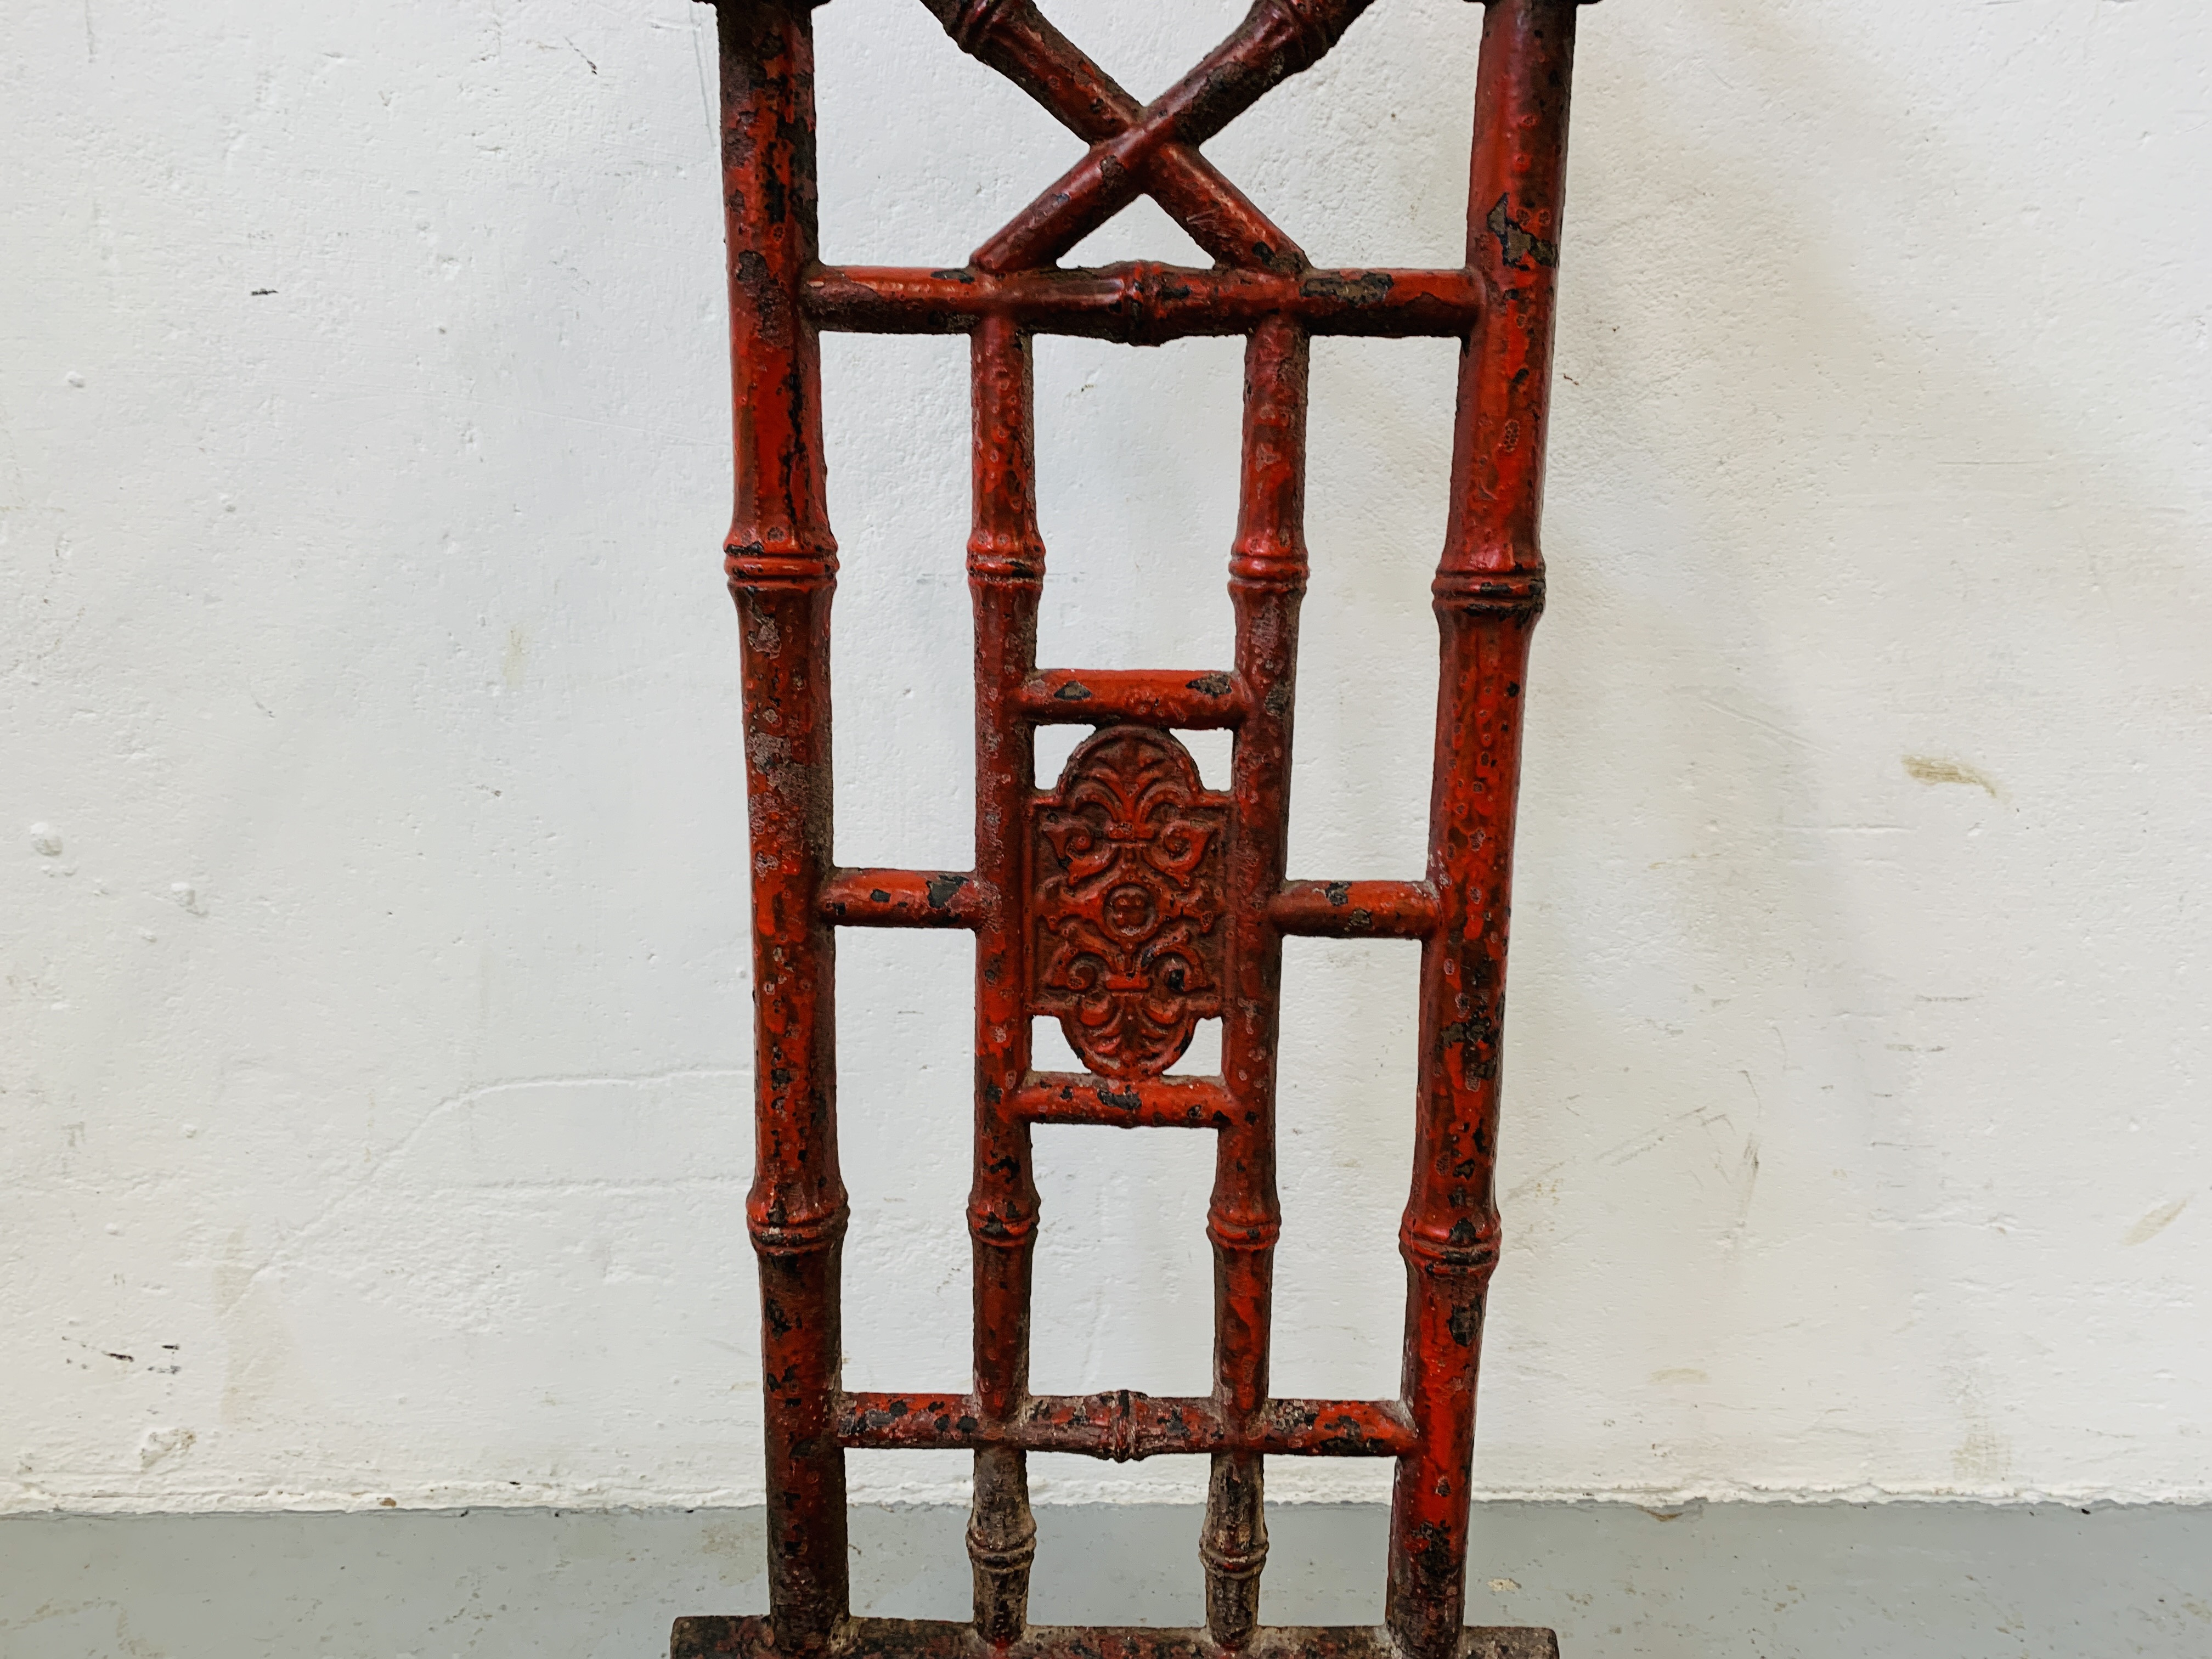 ANTIQUE CAST IRON UMBRELLA STAND - BAMBOO DESIGN (FLAKED RED PAINT) H 70CM. - Image 4 of 6